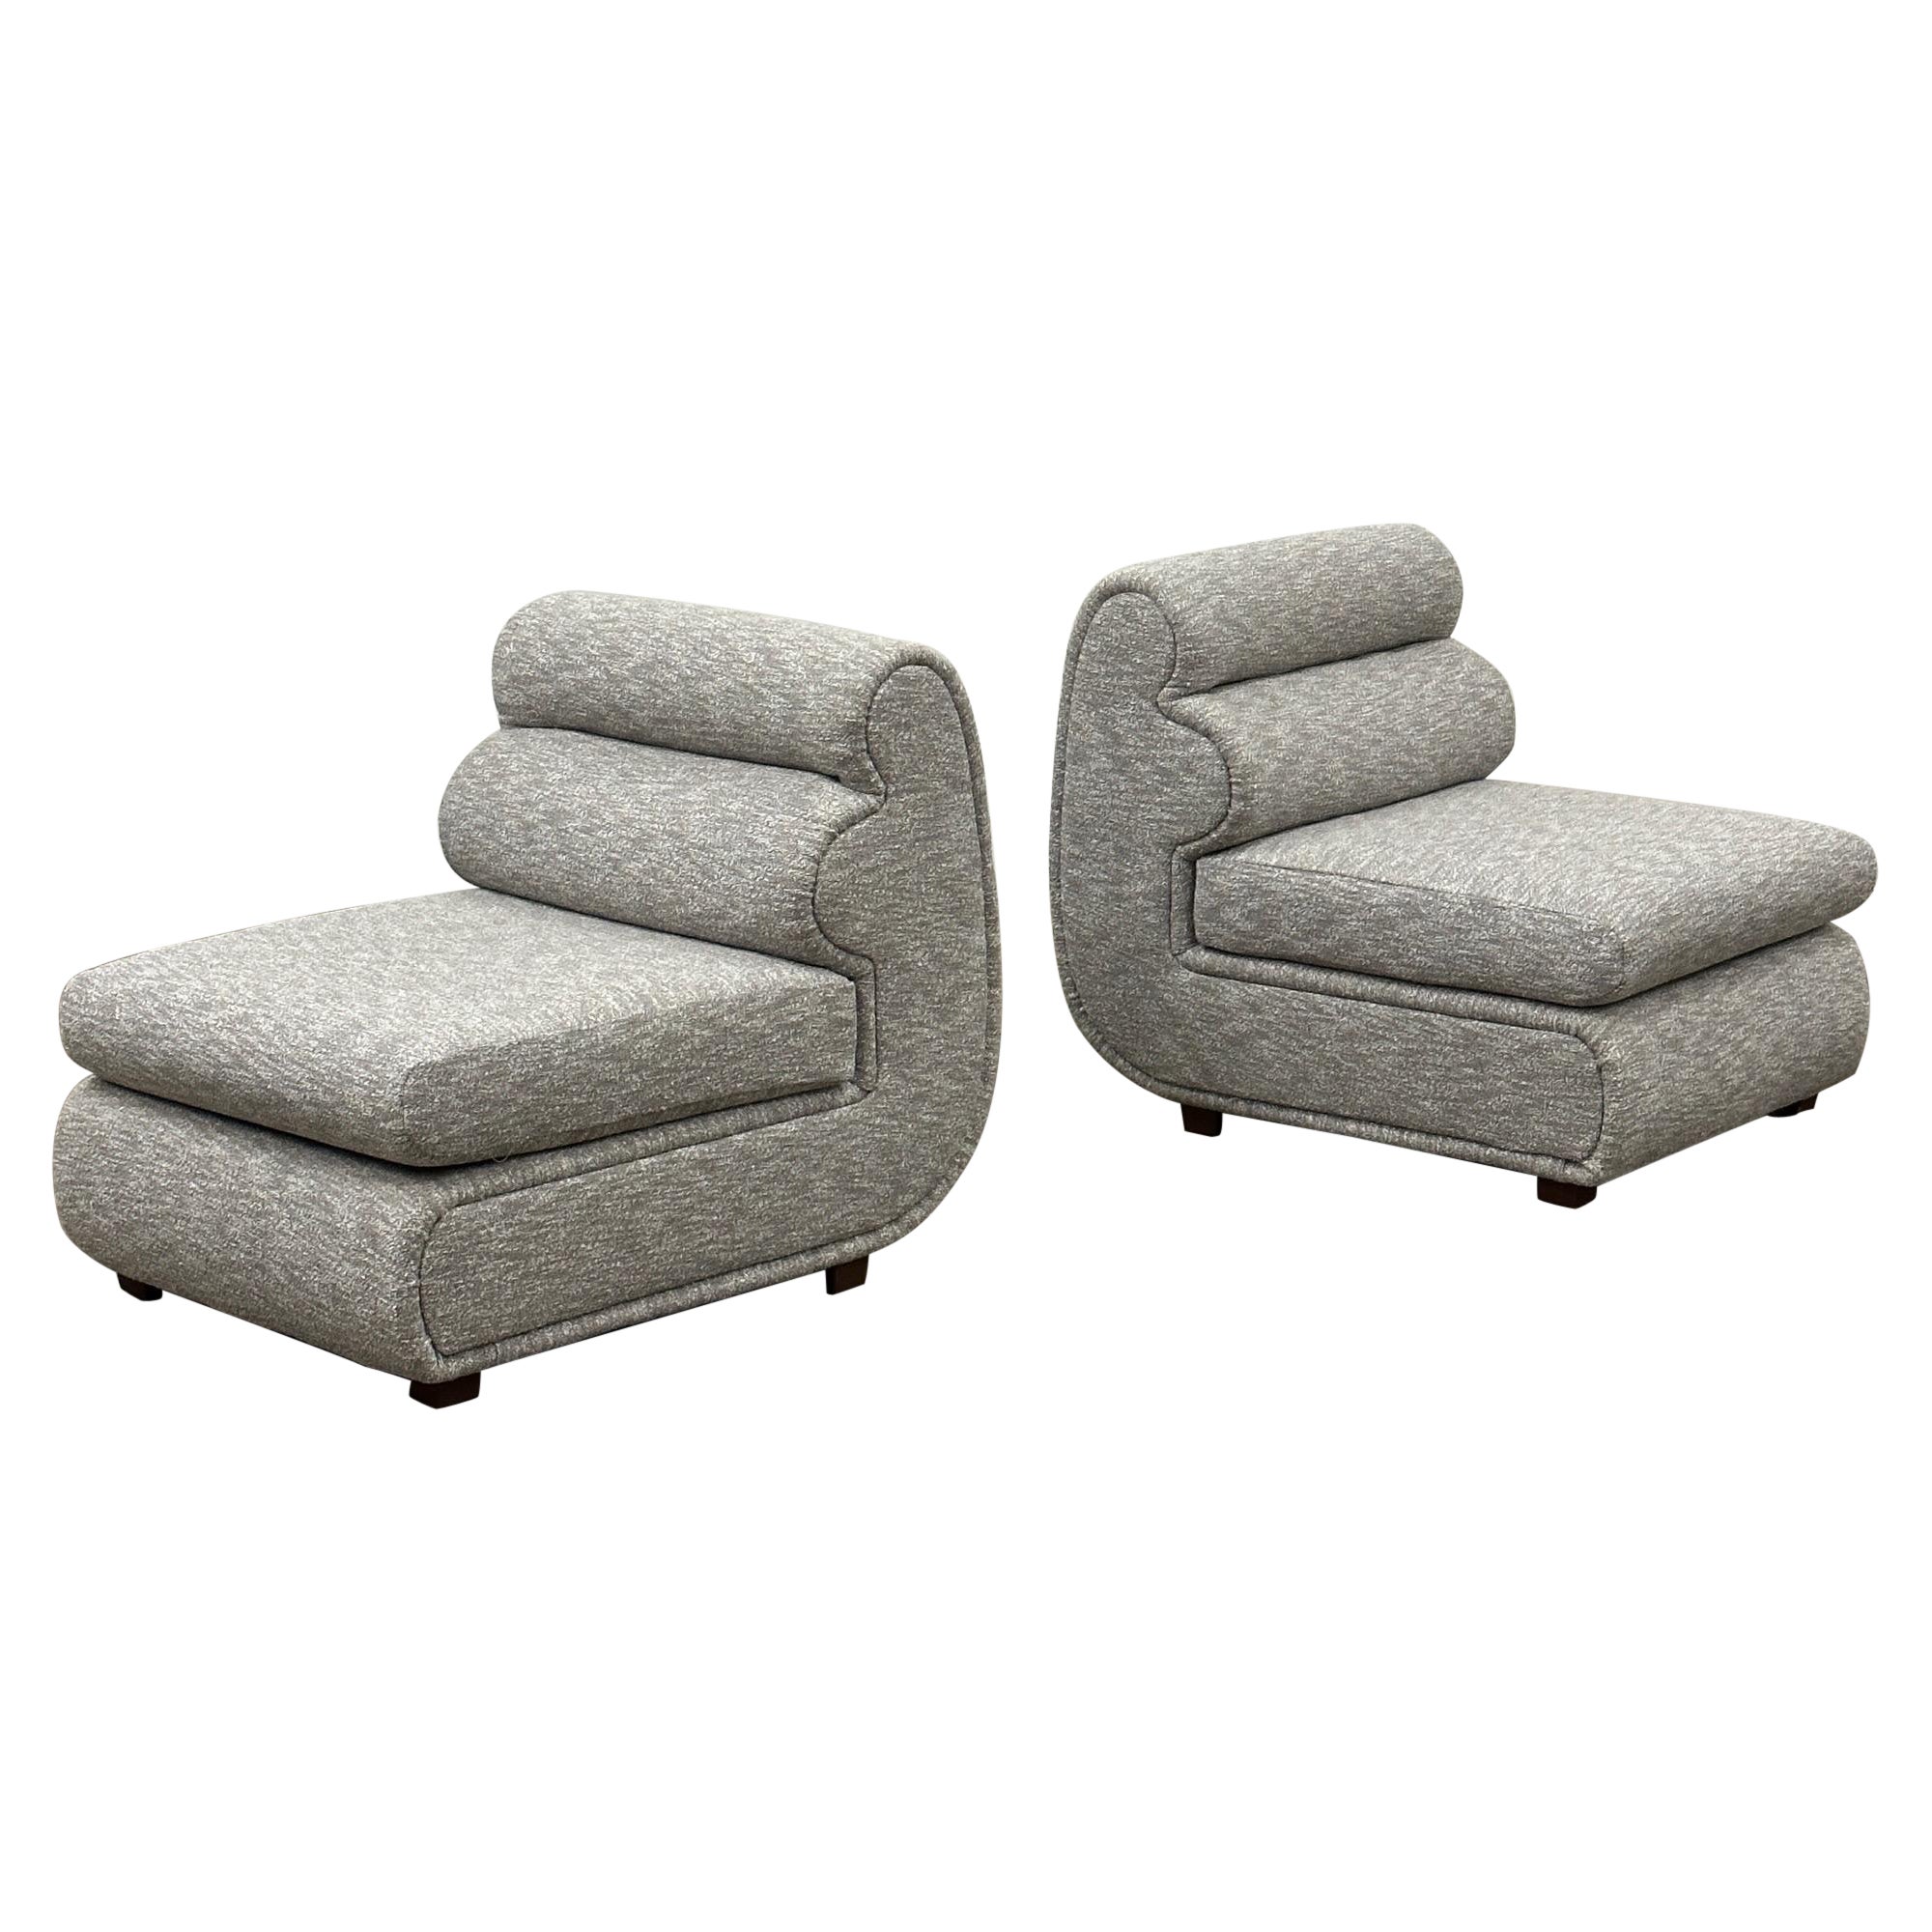 Bullnose Postmodern Slipper Chairs by Carson’s of High Point